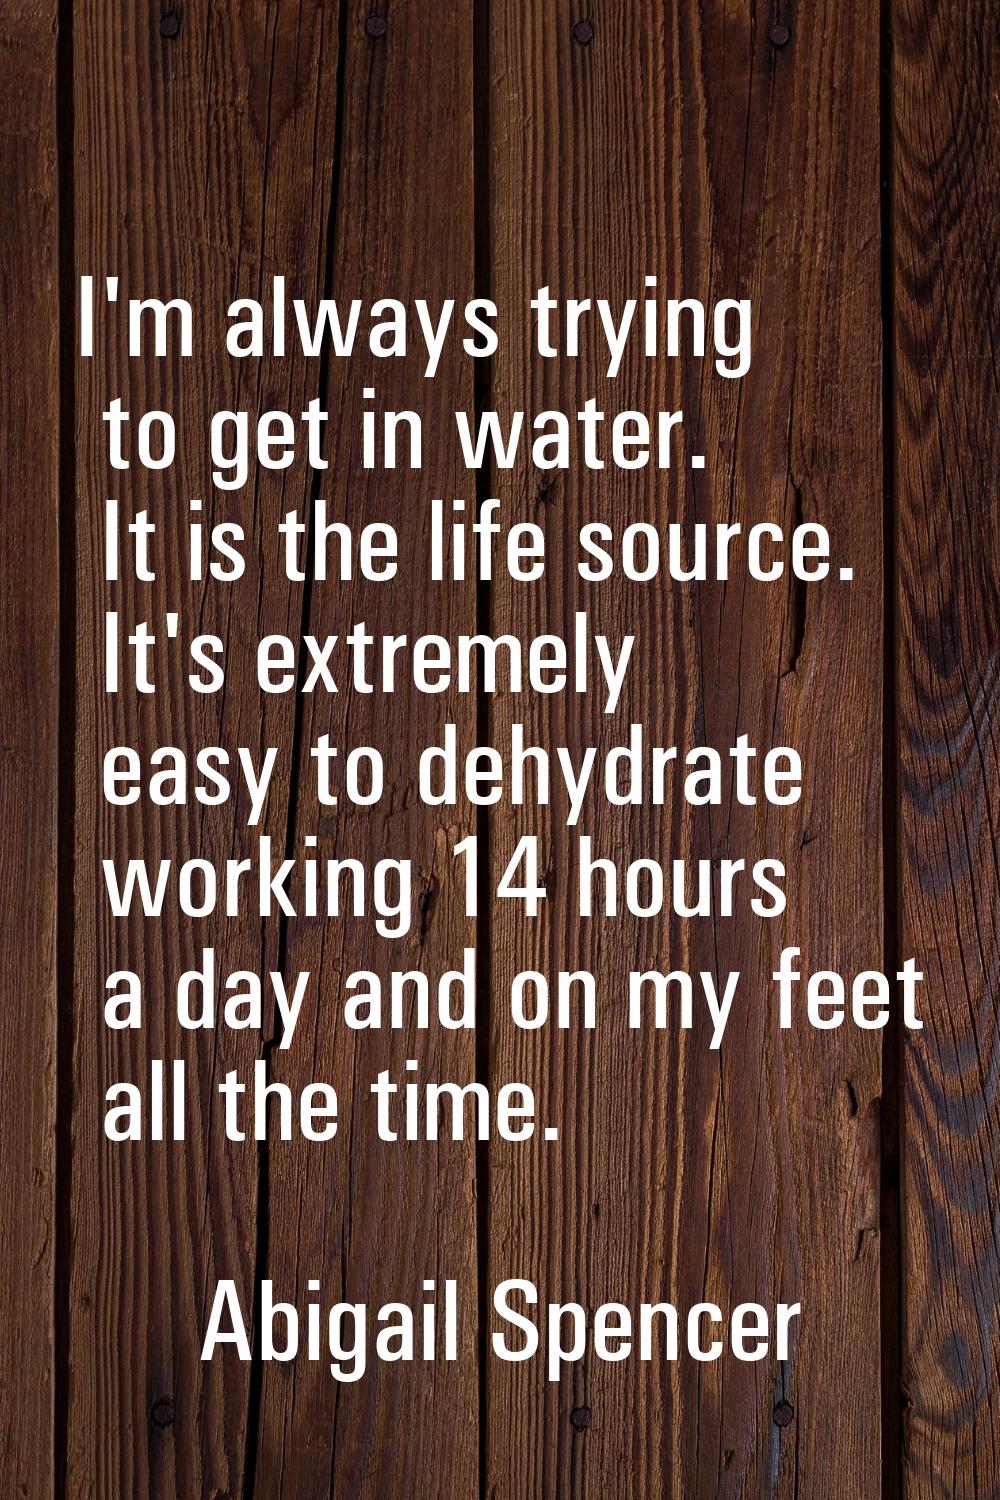 I'm always trying to get in water. It is the life source. It's extremely easy to dehydrate working 